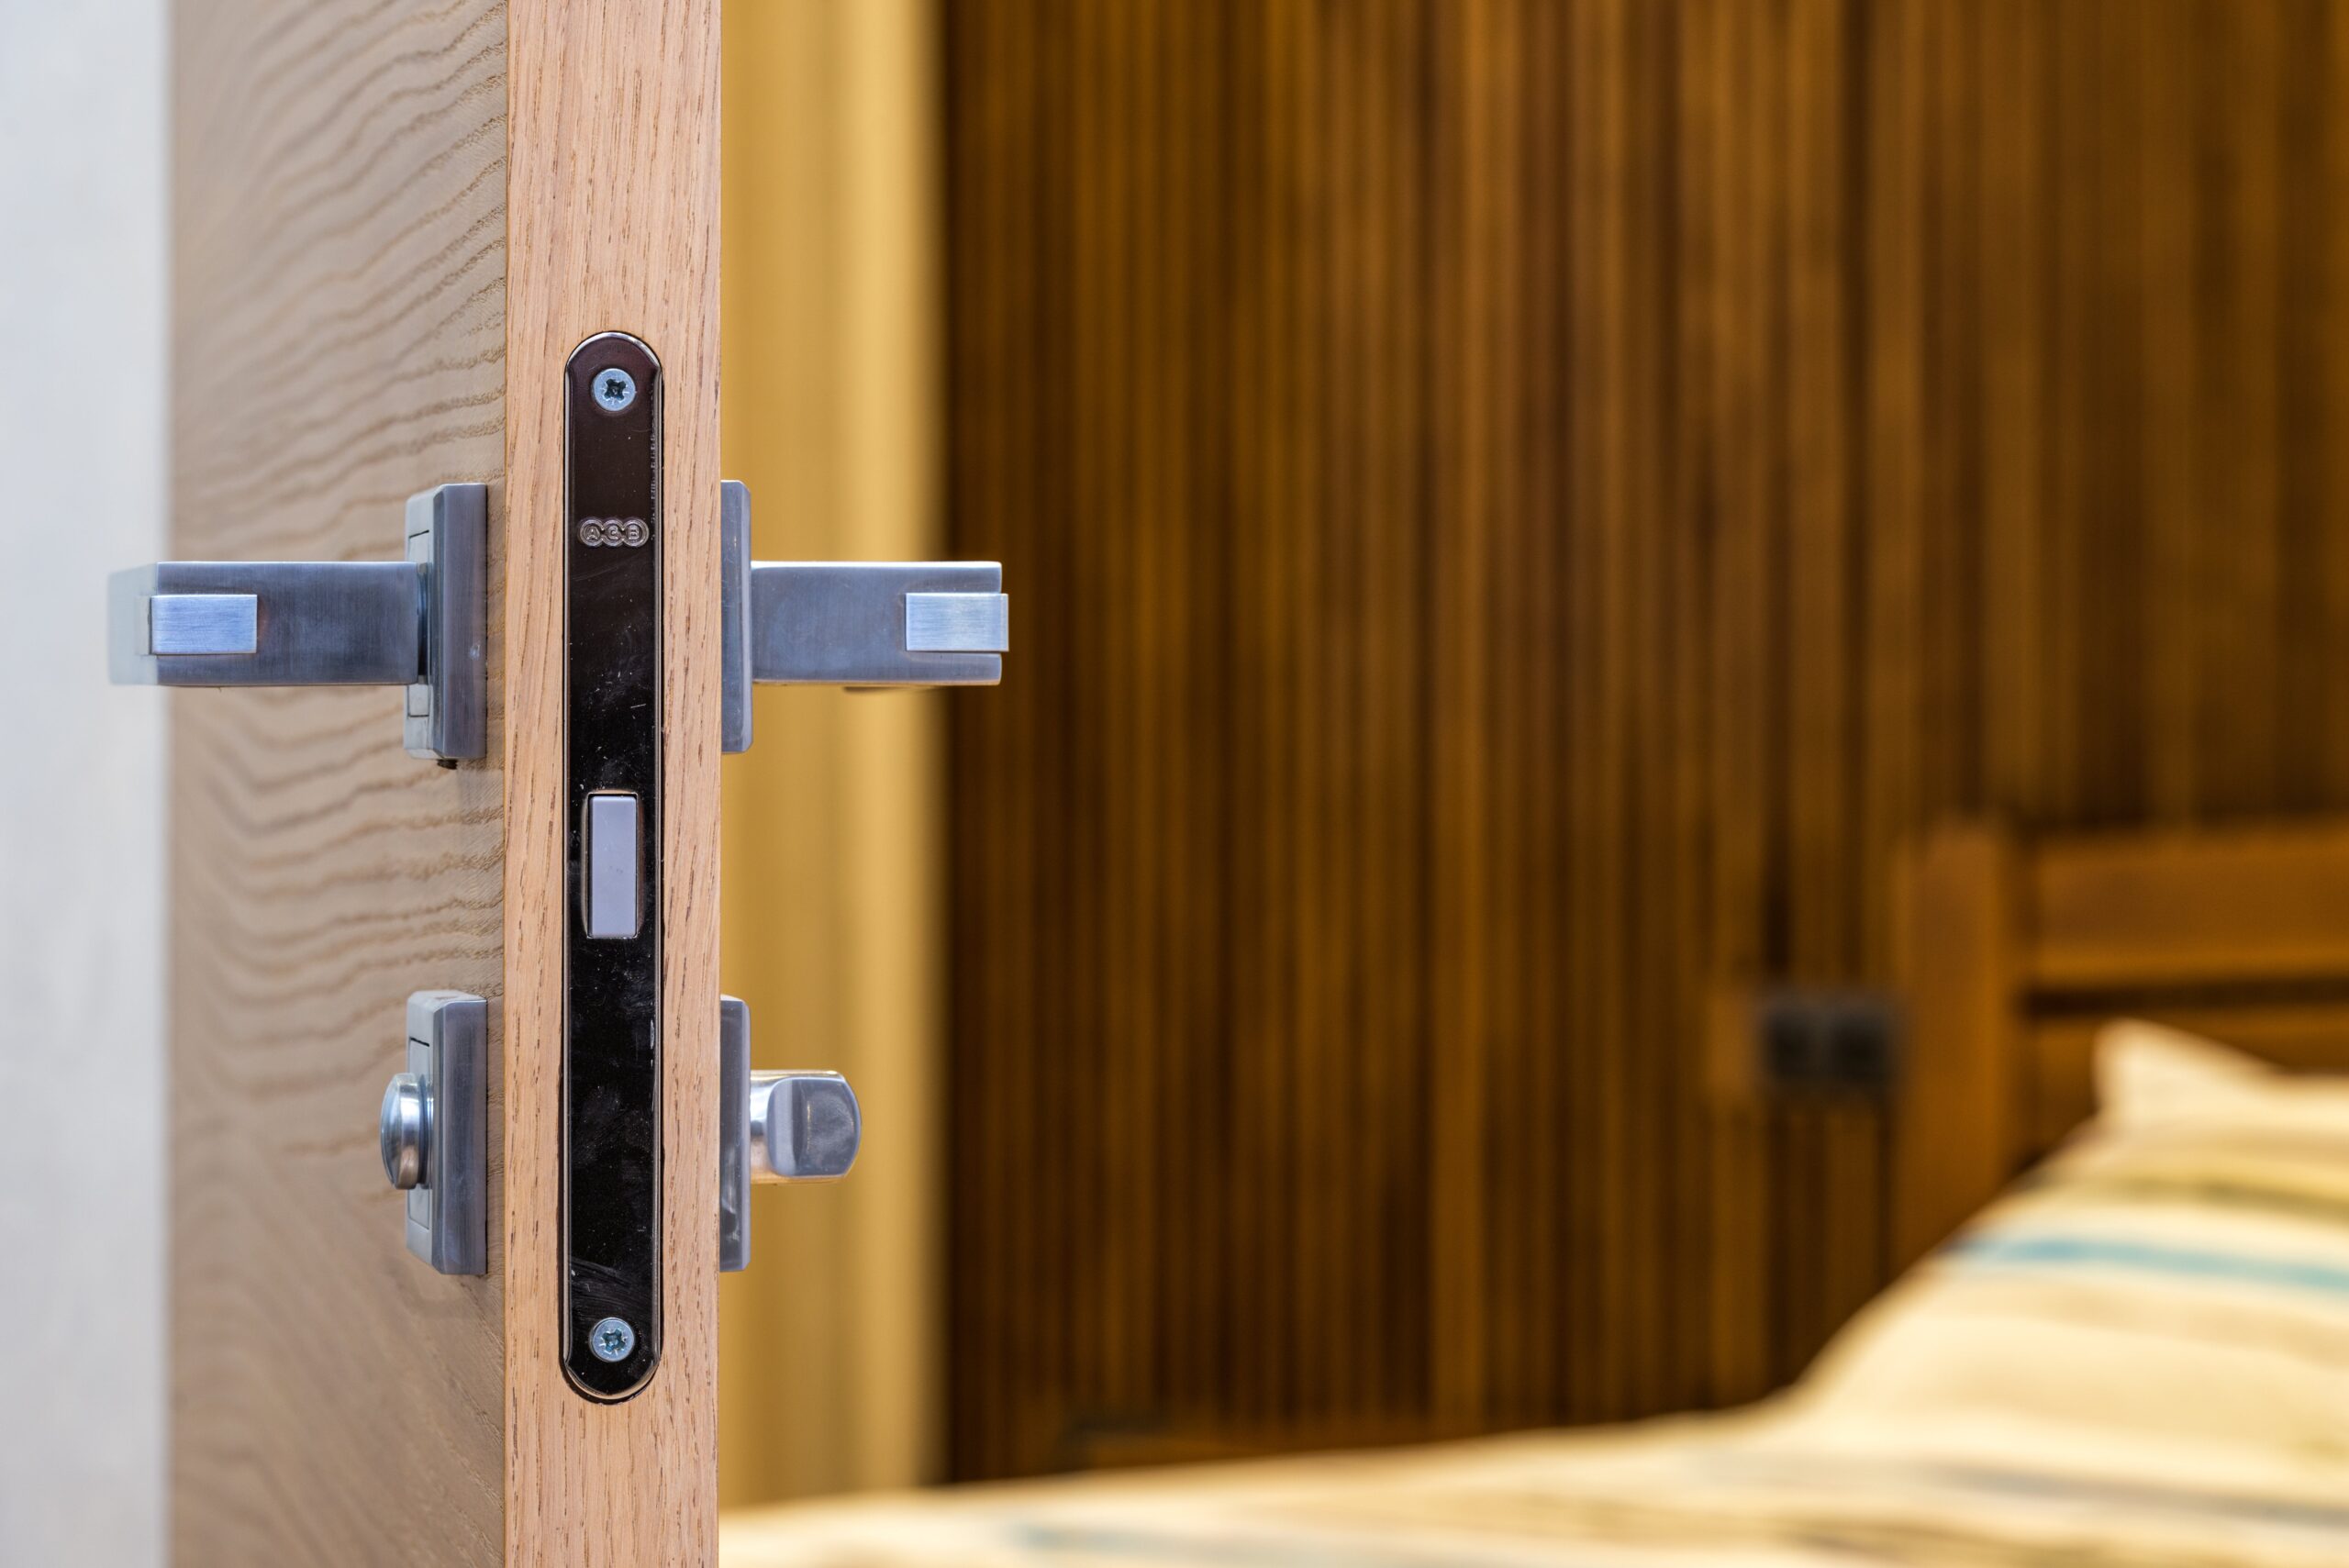 Locked Out A Guide to Regaining Access to Your Home in the UK